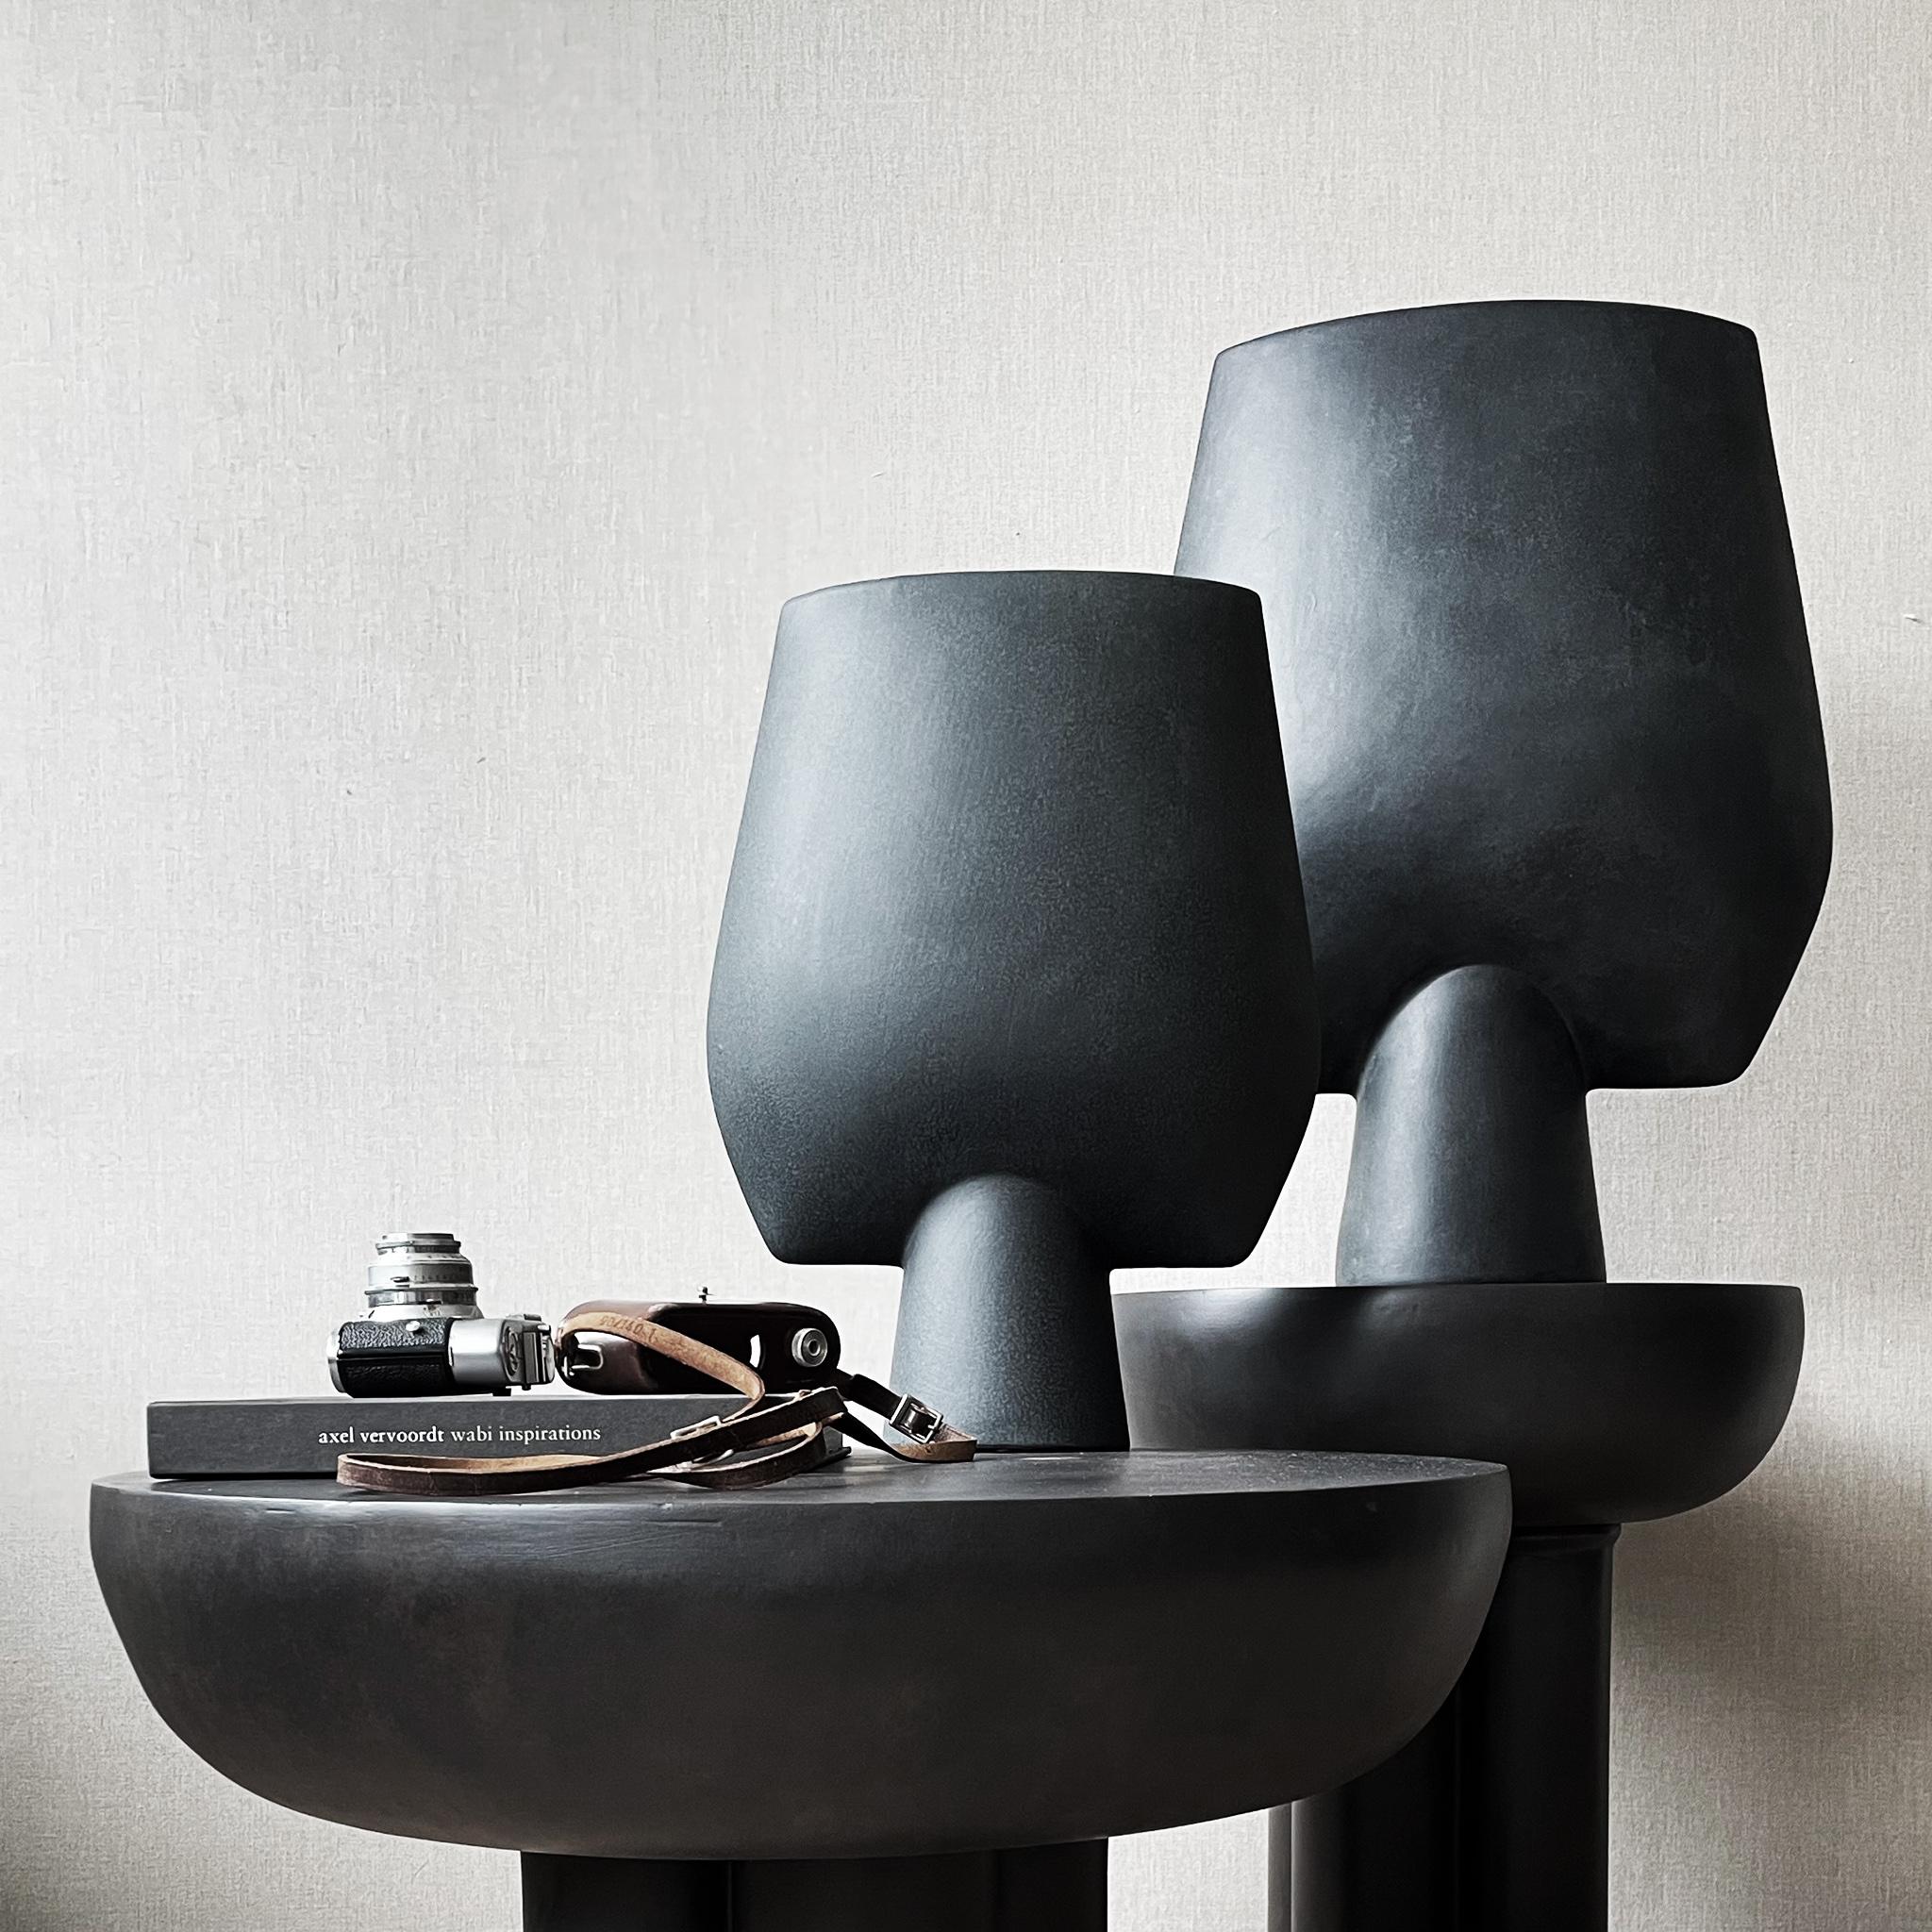 Burned black crown table tall by 101 Copenhagen
Designed by Kristian Sofus Hansen & Tommy Hyldahl
Dimensions: L 45 / W 45 /H 50 cm.
Materials: fiber concrete

The collection of tables entitled Crown is cast in one piece formed as a circular